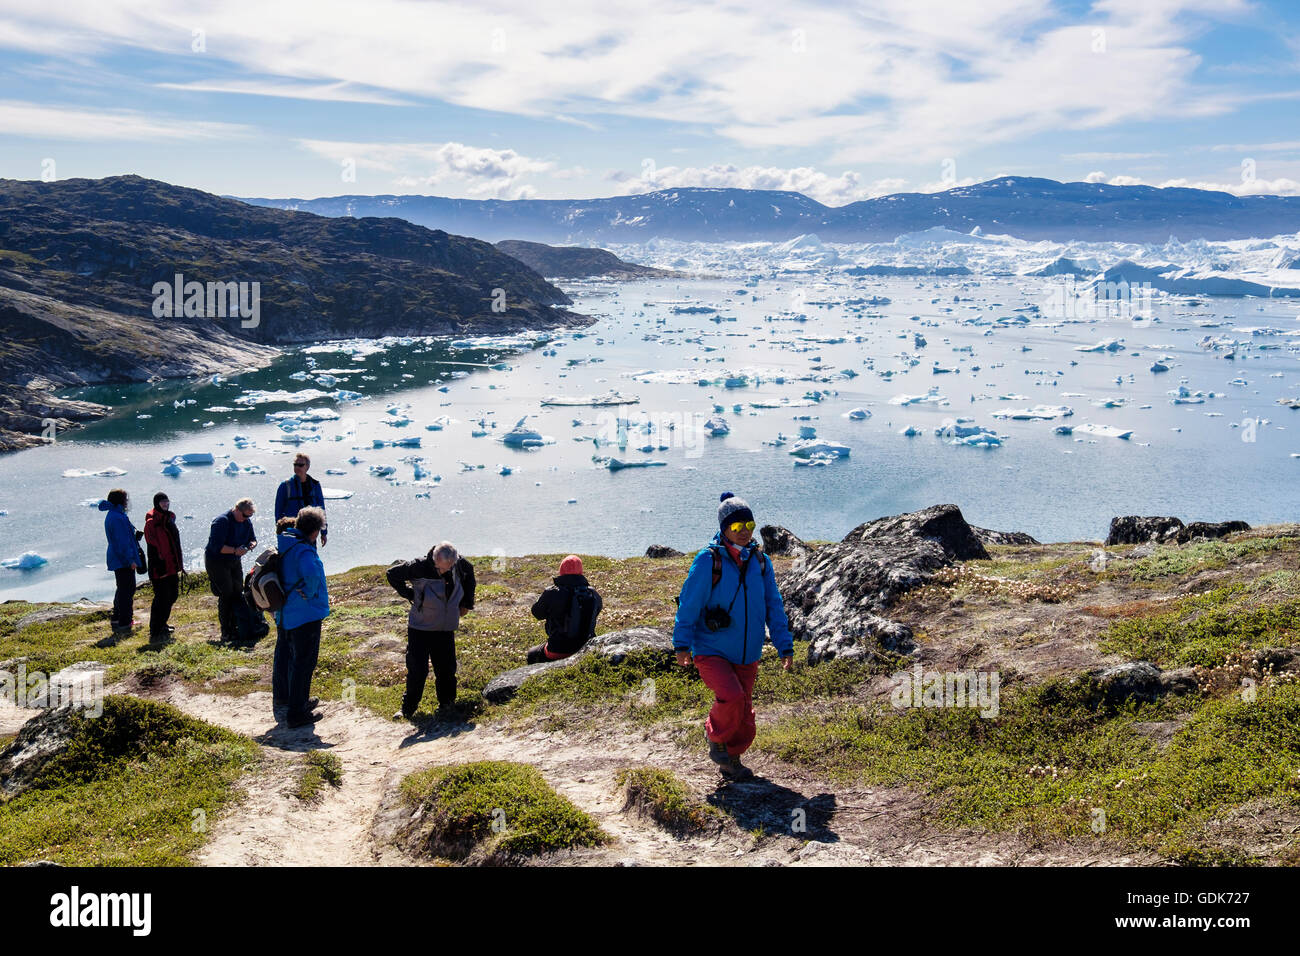 Hikers hiking on blue hike trail path by Jakobshavn or Ilulissat Icefjord with large icebergs in fjord in arctic summer. Ilulissat Western Greenland Stock Photo